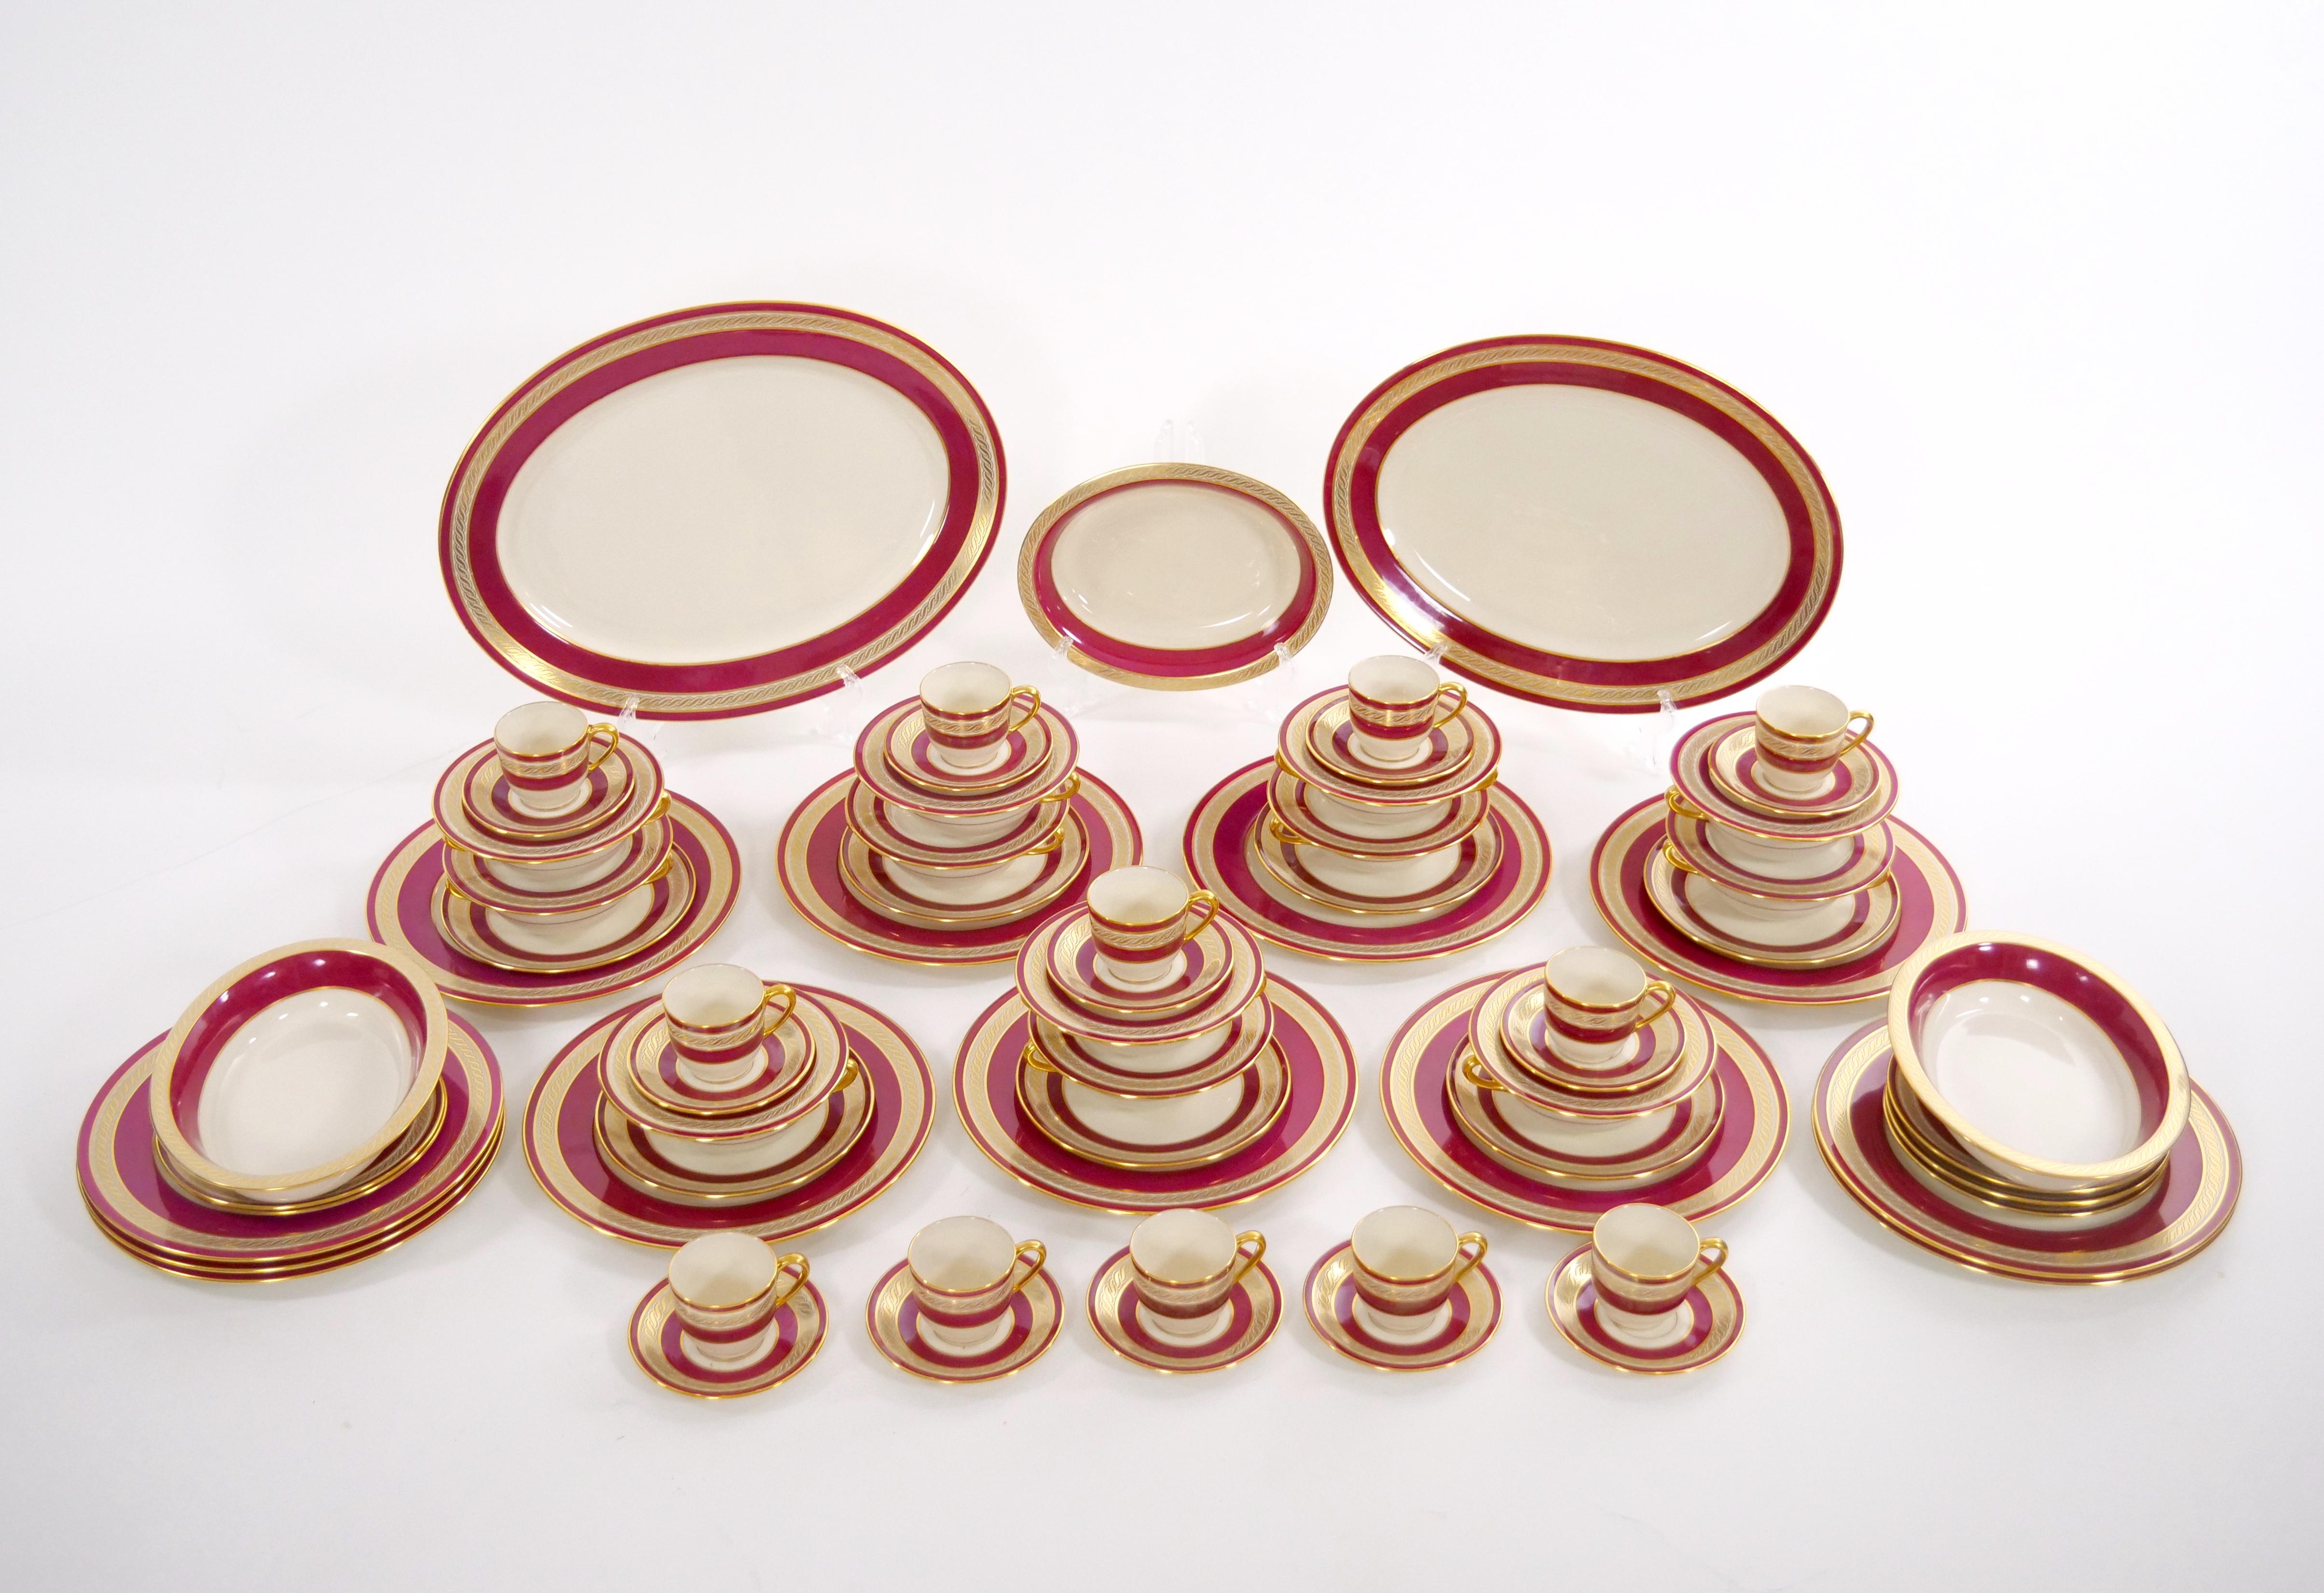 Elevate your dining experience with this exquisite American Porcelain/Gilt Braid Dinnerware Service, crafted by Lenox for J.E. Caldwell & Co. This stunning set includes everything you need to entertain in style, with service for 12 people. Each